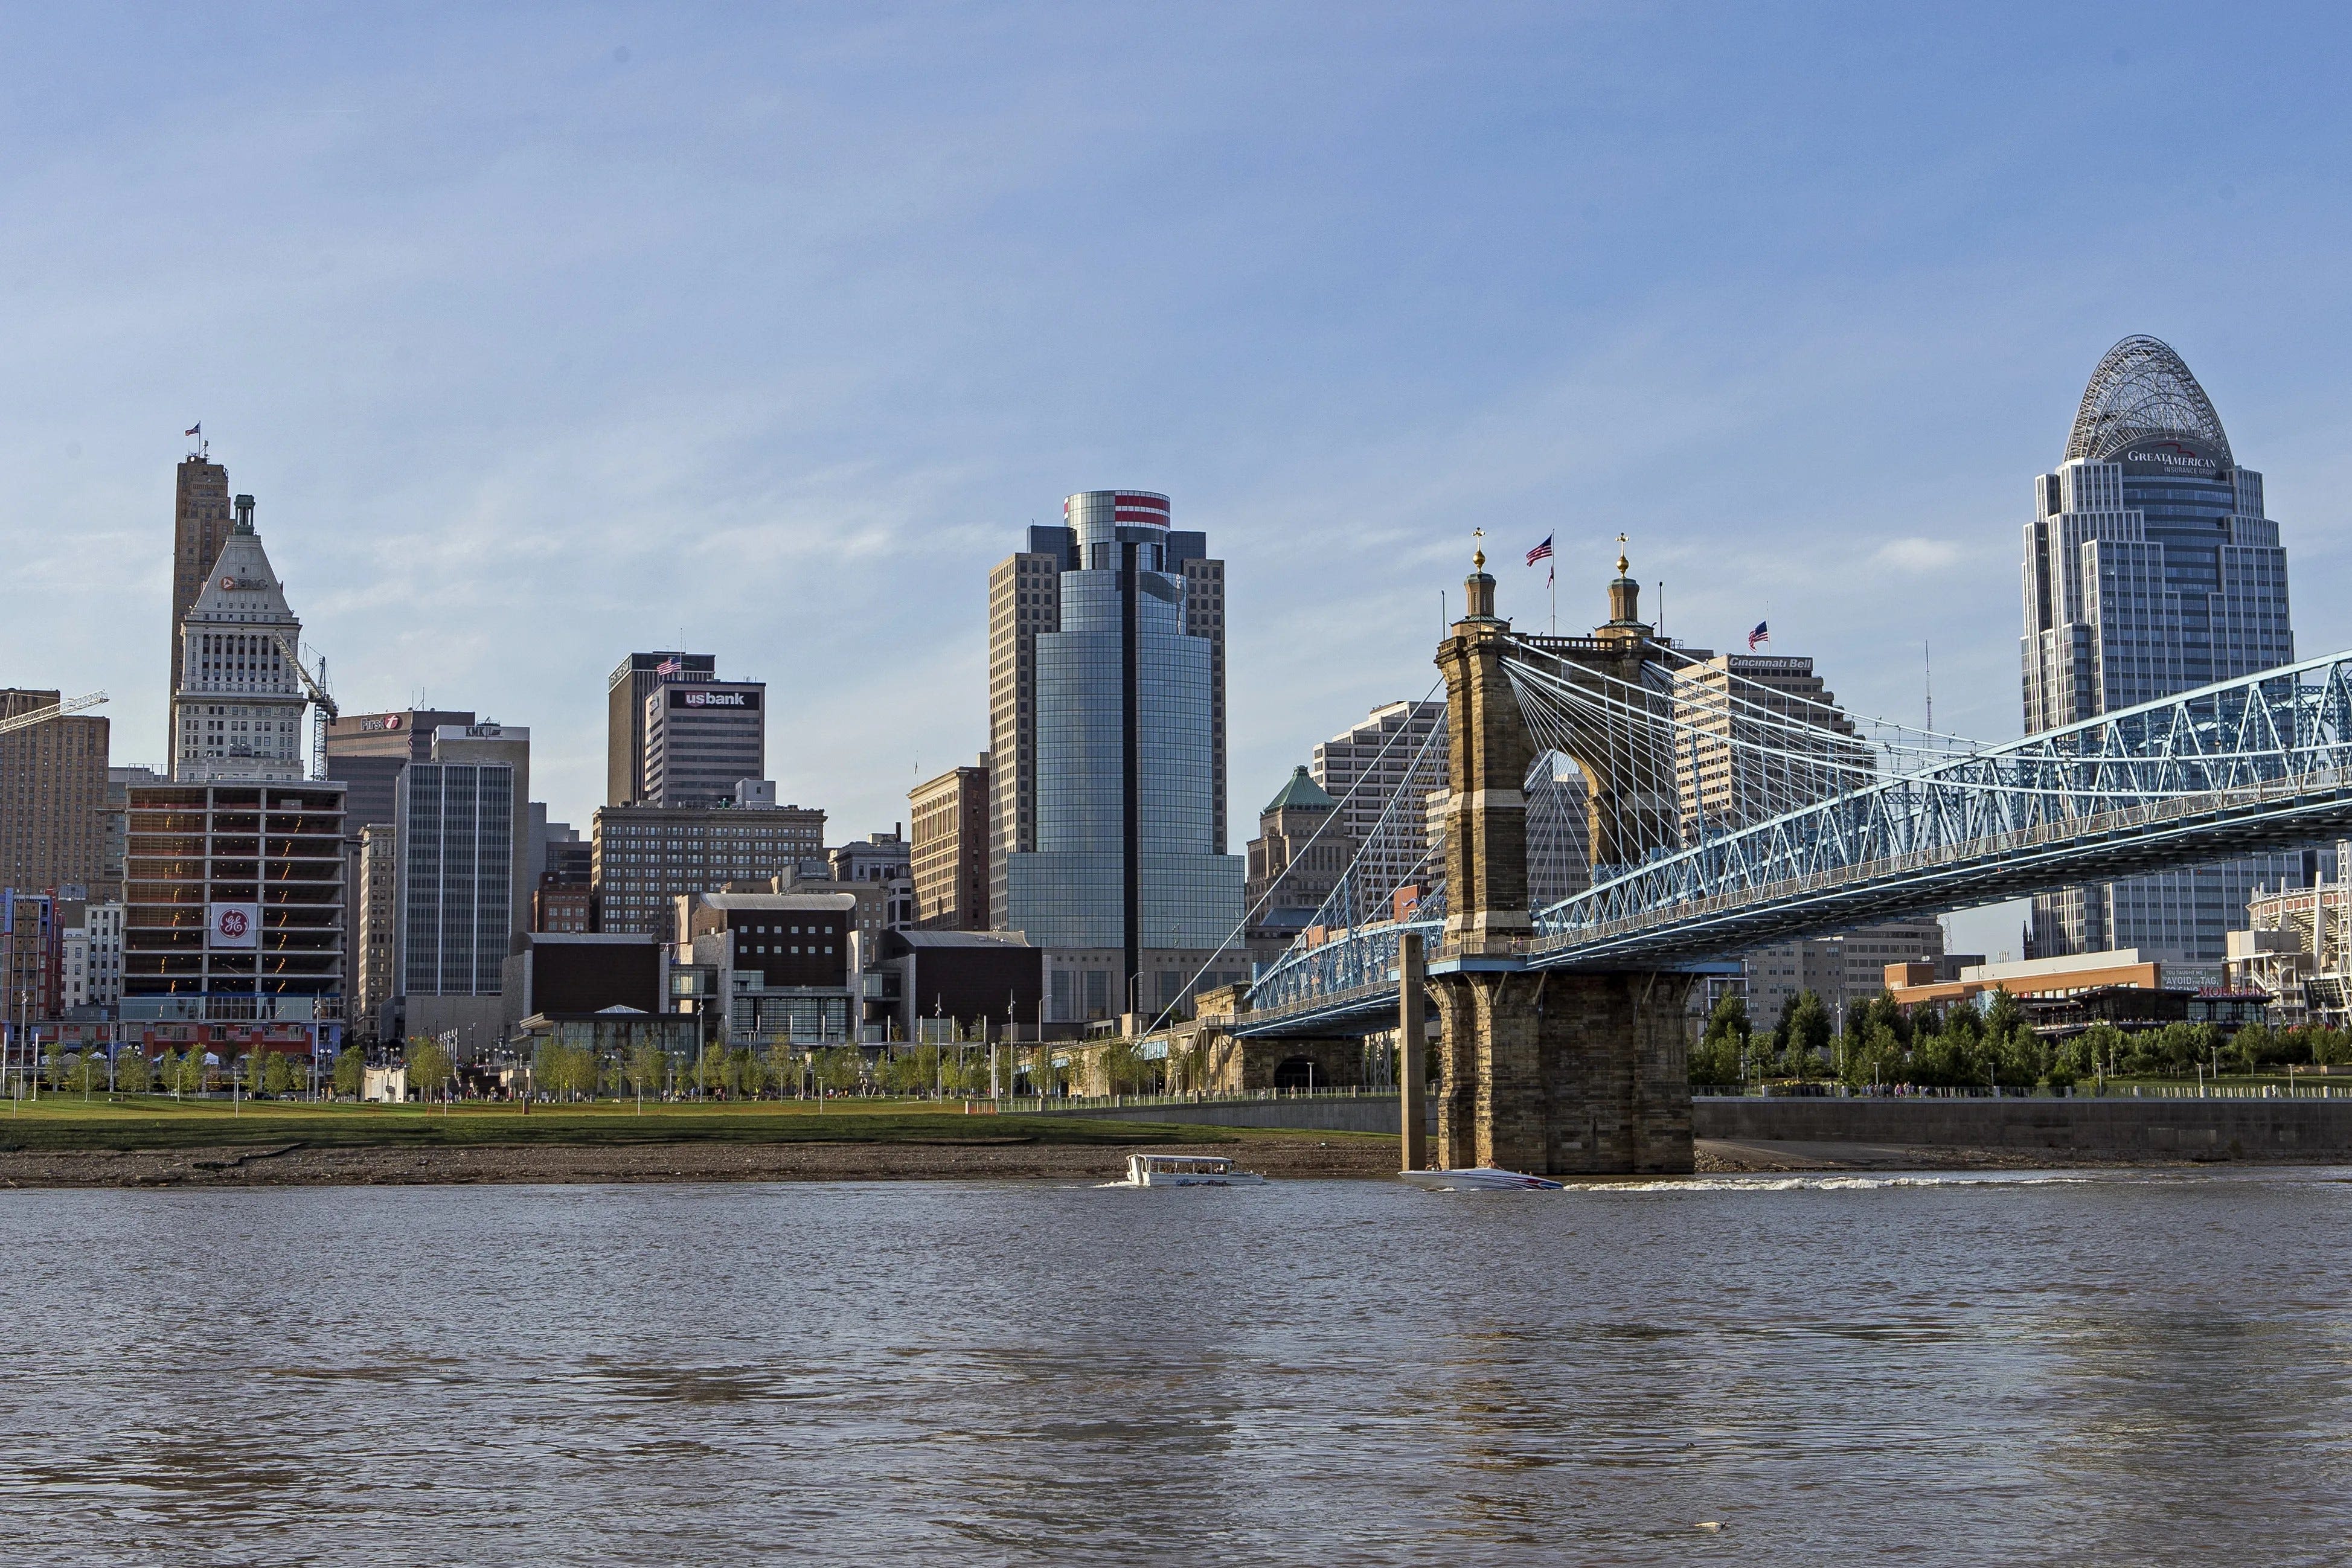 America's 250th birthday to be celebrated in Cincinnati with 'River Roots' celebration